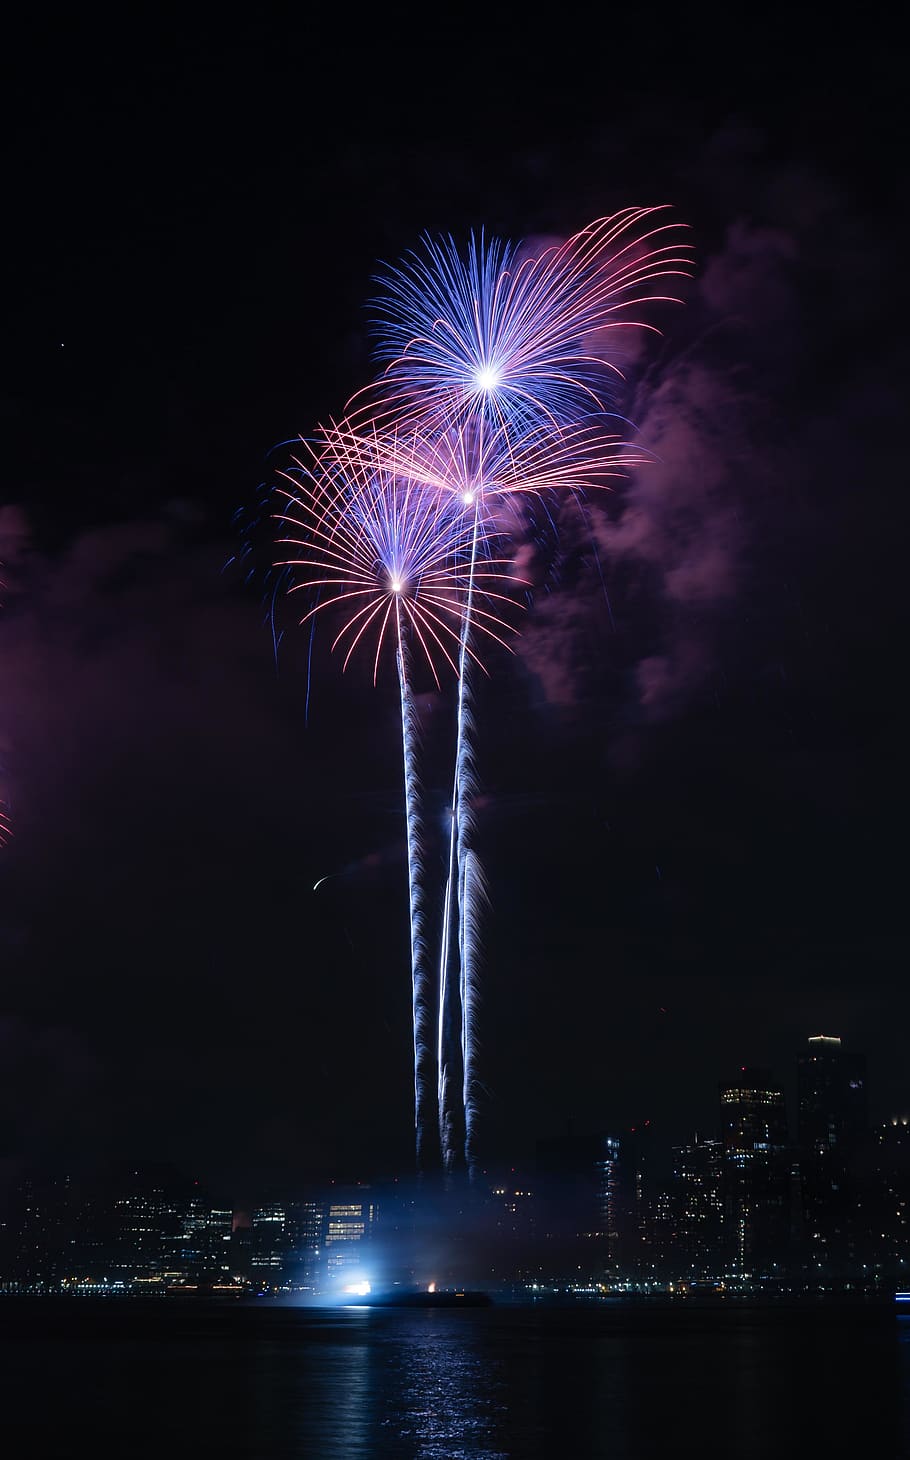 united states, long island city, nyc, water, boat, fireworks